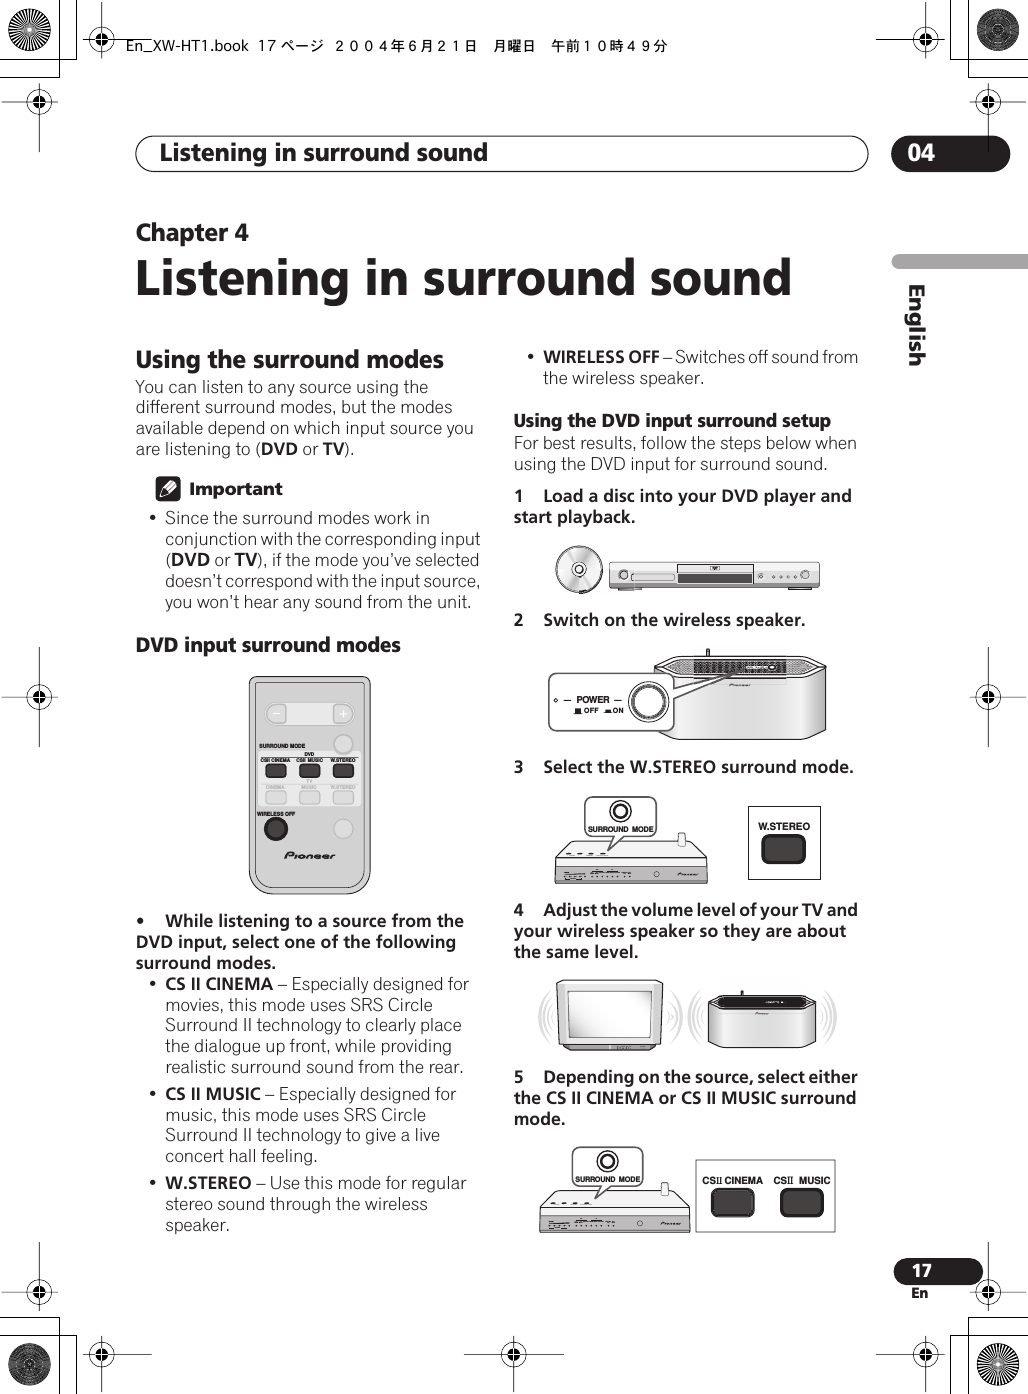  Listening in surround sound  04 17 En EnglishChapter 4 Listening in surround sound Using the surround modes You can listen to any source using the different surround modes, but the modes available depend on which input source you are listening to ( DVD  or  TV ).  Important • Since the surround modes work in conjunction with the corresponding input ( DVD  or  TV ), if the mode you’ve selected doesn’t correspond with the input source, you won’t hear any sound from the unit. DVD input surround modes • While listening to a source from the DVD input, select one of the following surround modes. • CS II CINEMA  – Especially designed for movies, this mode uses SRS Circle Surround II technology to clearly place the dialogue up front, while providing realistic surround sound from the rear.• CS II MUSIC  – Especially designed for music, this mode uses SRS Circle Surround II technology to give a live concert hall feeling.• W.STEREO  – Use this mode for regular stereo sound through the wireless speaker.• WIRELESS OFF  – Switches off sound from the wireless speaker. Using the DVD input surround setup For best results, follow the steps below when using the DVD input for surround sound. 1 Load a disc into your DVD player and start playback.2 Switch on the wireless speaker.3 Select the W.STEREO surround mode.4Adjust the volume level of your TV and your wireless speaker so they are about the same level.5Depending on the source, select either the CS II CINEMA or CS II MUSIC surround mode. CSII CINEMA CSII MUSIC W.STEREOW.STEREOTVMUSICCINEMASURROUND MODEDVDWIRELESS OFFPOWEROFF ONW.STEREOVOLUMEDVDCSCINEMA MUSICCINEMA MUSICW.STEREO W.STEREOWIRELESSOFFATT/MUTECHANNEL1234TVCSSURROUND  MODECSCINEMA CSMUSICVOLUMEDVDCSCINEMA MUSICCINEMA MUSICW.STEREO W.STEREOWIRELESSOFFATT/MUTECHANNEL1234TVCSSURROUND  MODEEn_XW-HT1.book 17 ページ ２００４年６月２１日　月曜日　午前１０時４９分